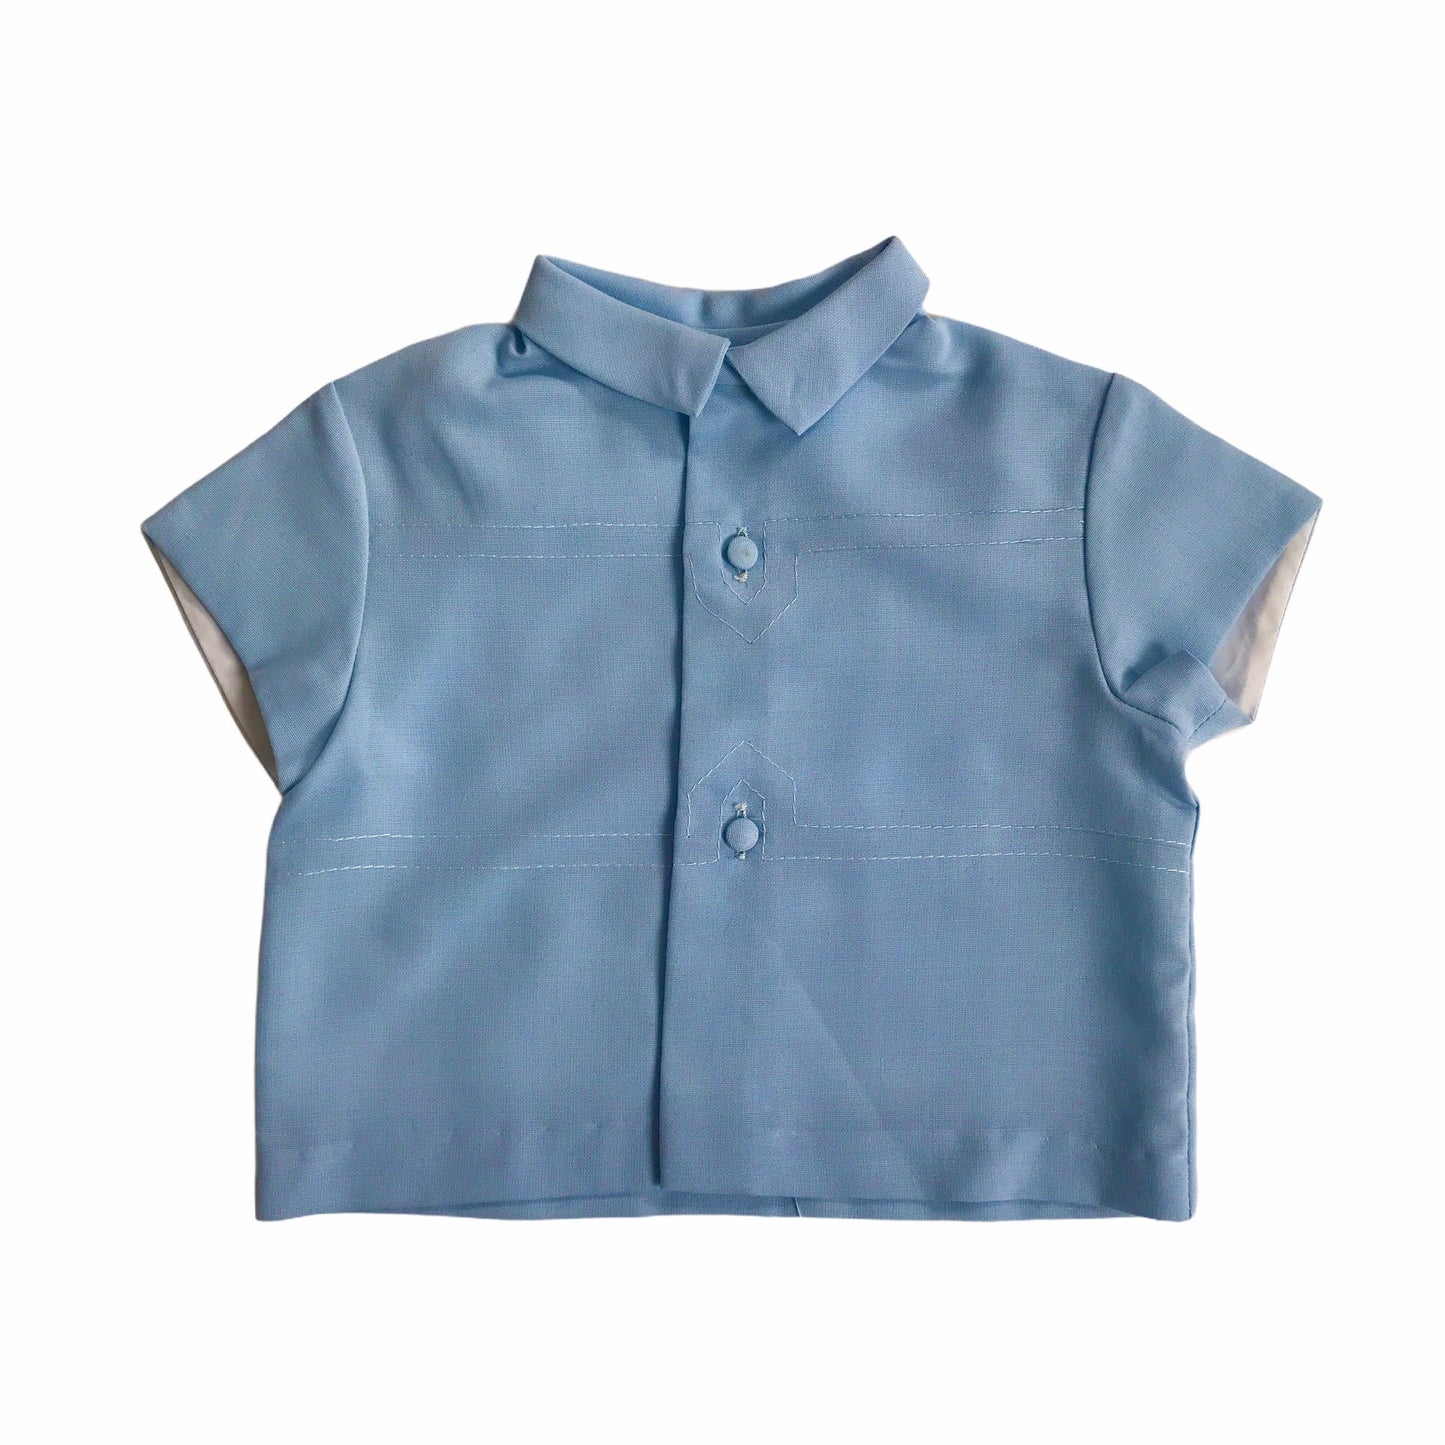 Vintage 1960s Blue Buttoned Top French Made 9-12 Months